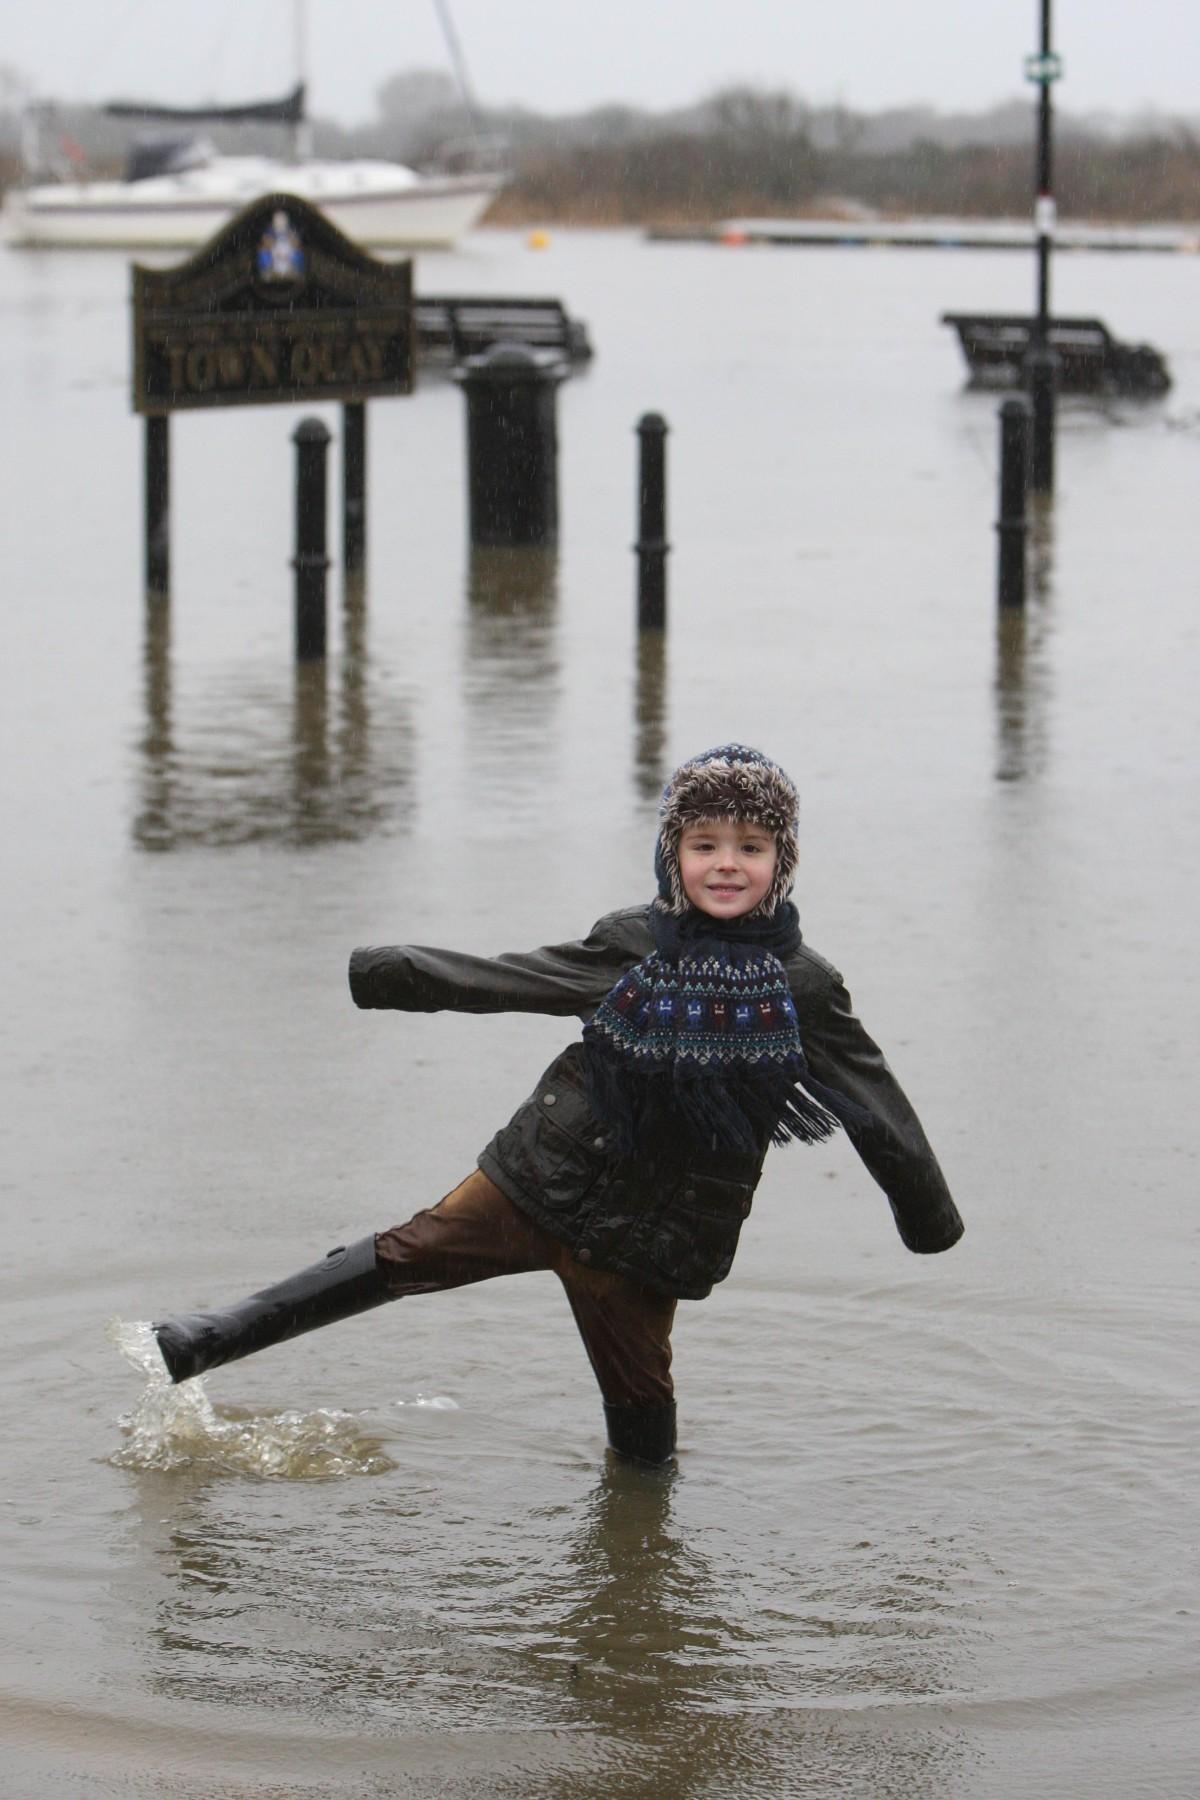 Heavy rain and strong winds cause flooding and high tides across Dorset. Jack Olley,5, finds the water's not quite over his wellies at Christchurch Quay.